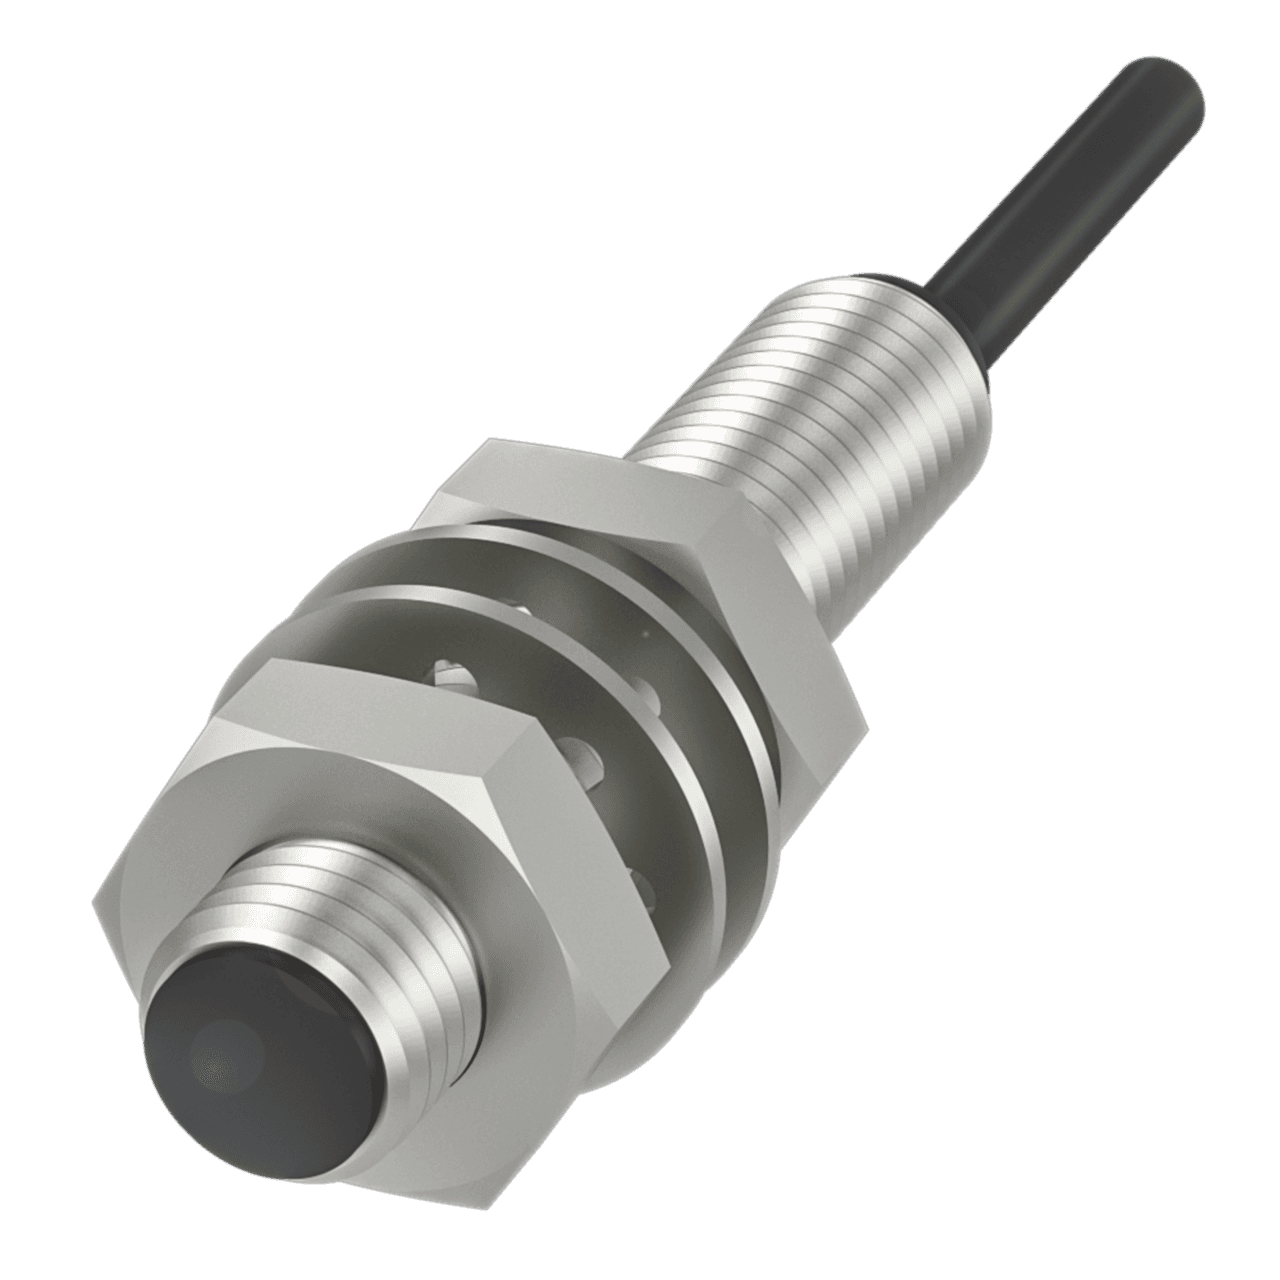 Balluff BES00CW Inductive standard sensors with preferred type, Dimension: Ø 8 x 40 mm, Style: M8x1, Installation: for flush mounting, Range: 2 mm, Switching output: PNP Normally open (NO), Switching frequency: 700 Hz, Housing material: Stainless steel